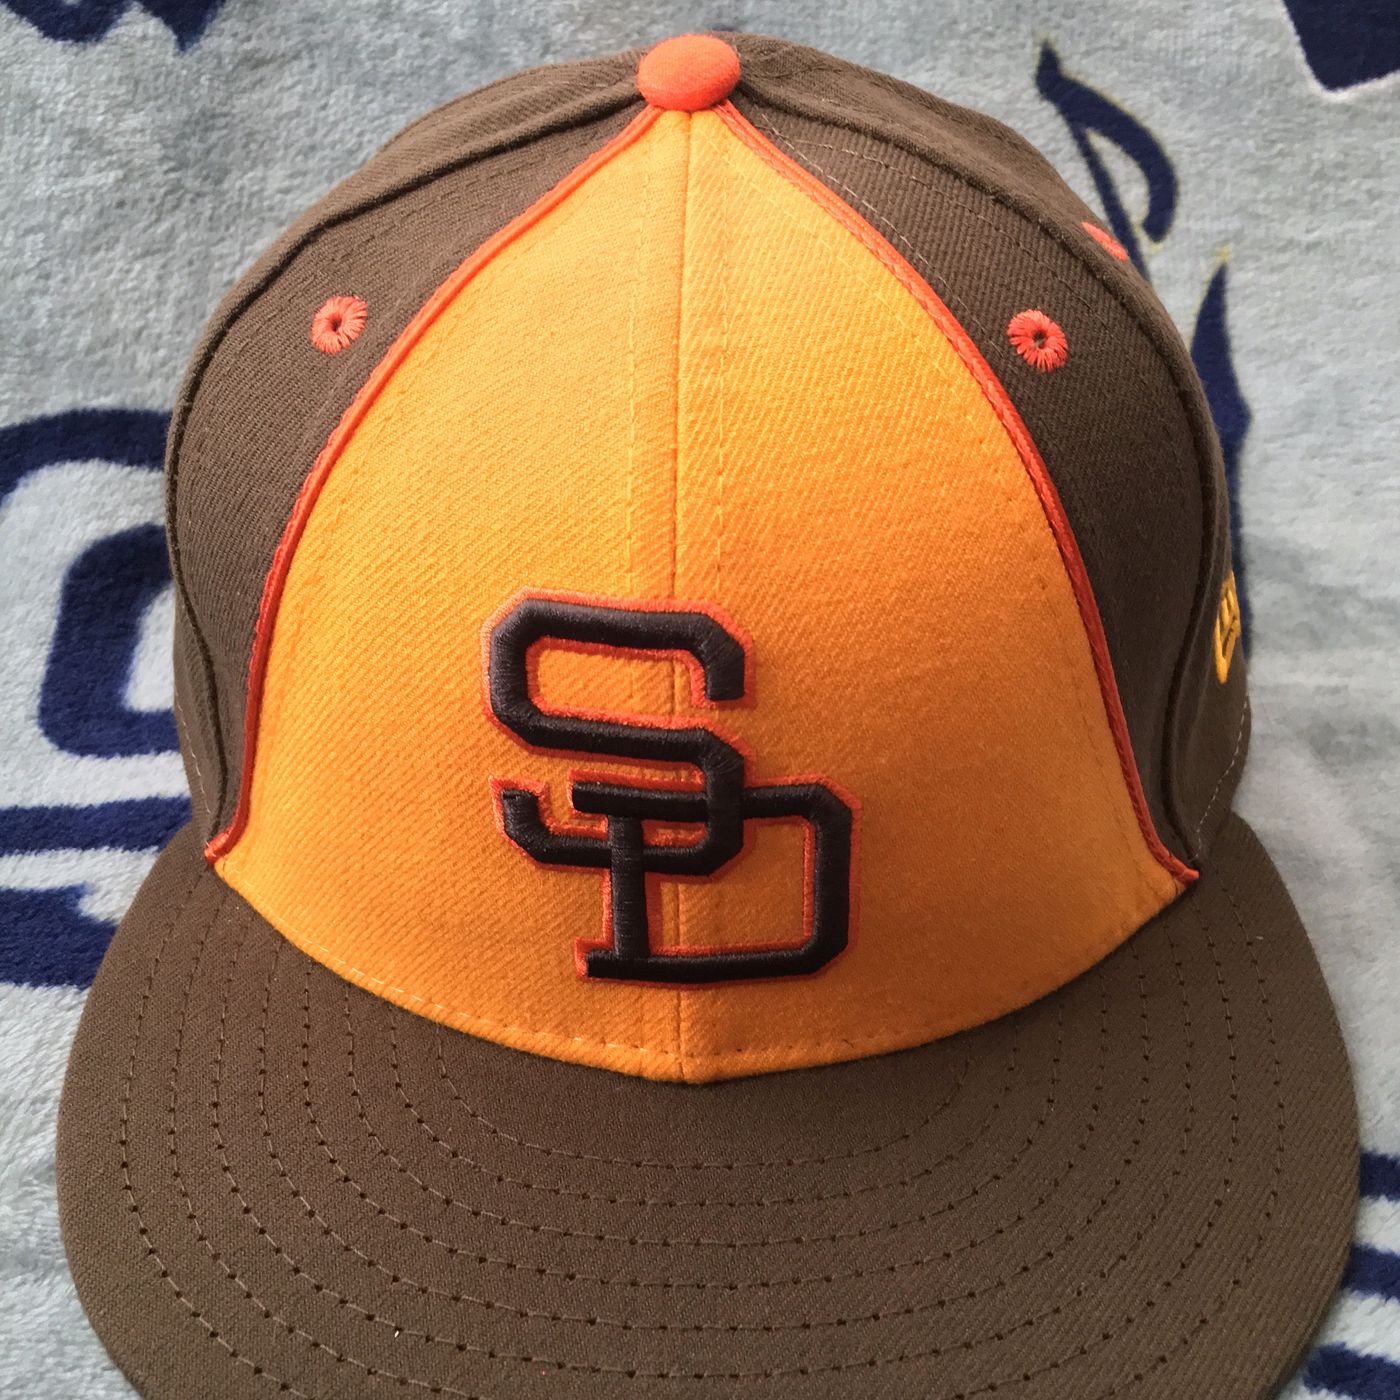 1998 Padres Retro Night in review - Gaslamp Ball